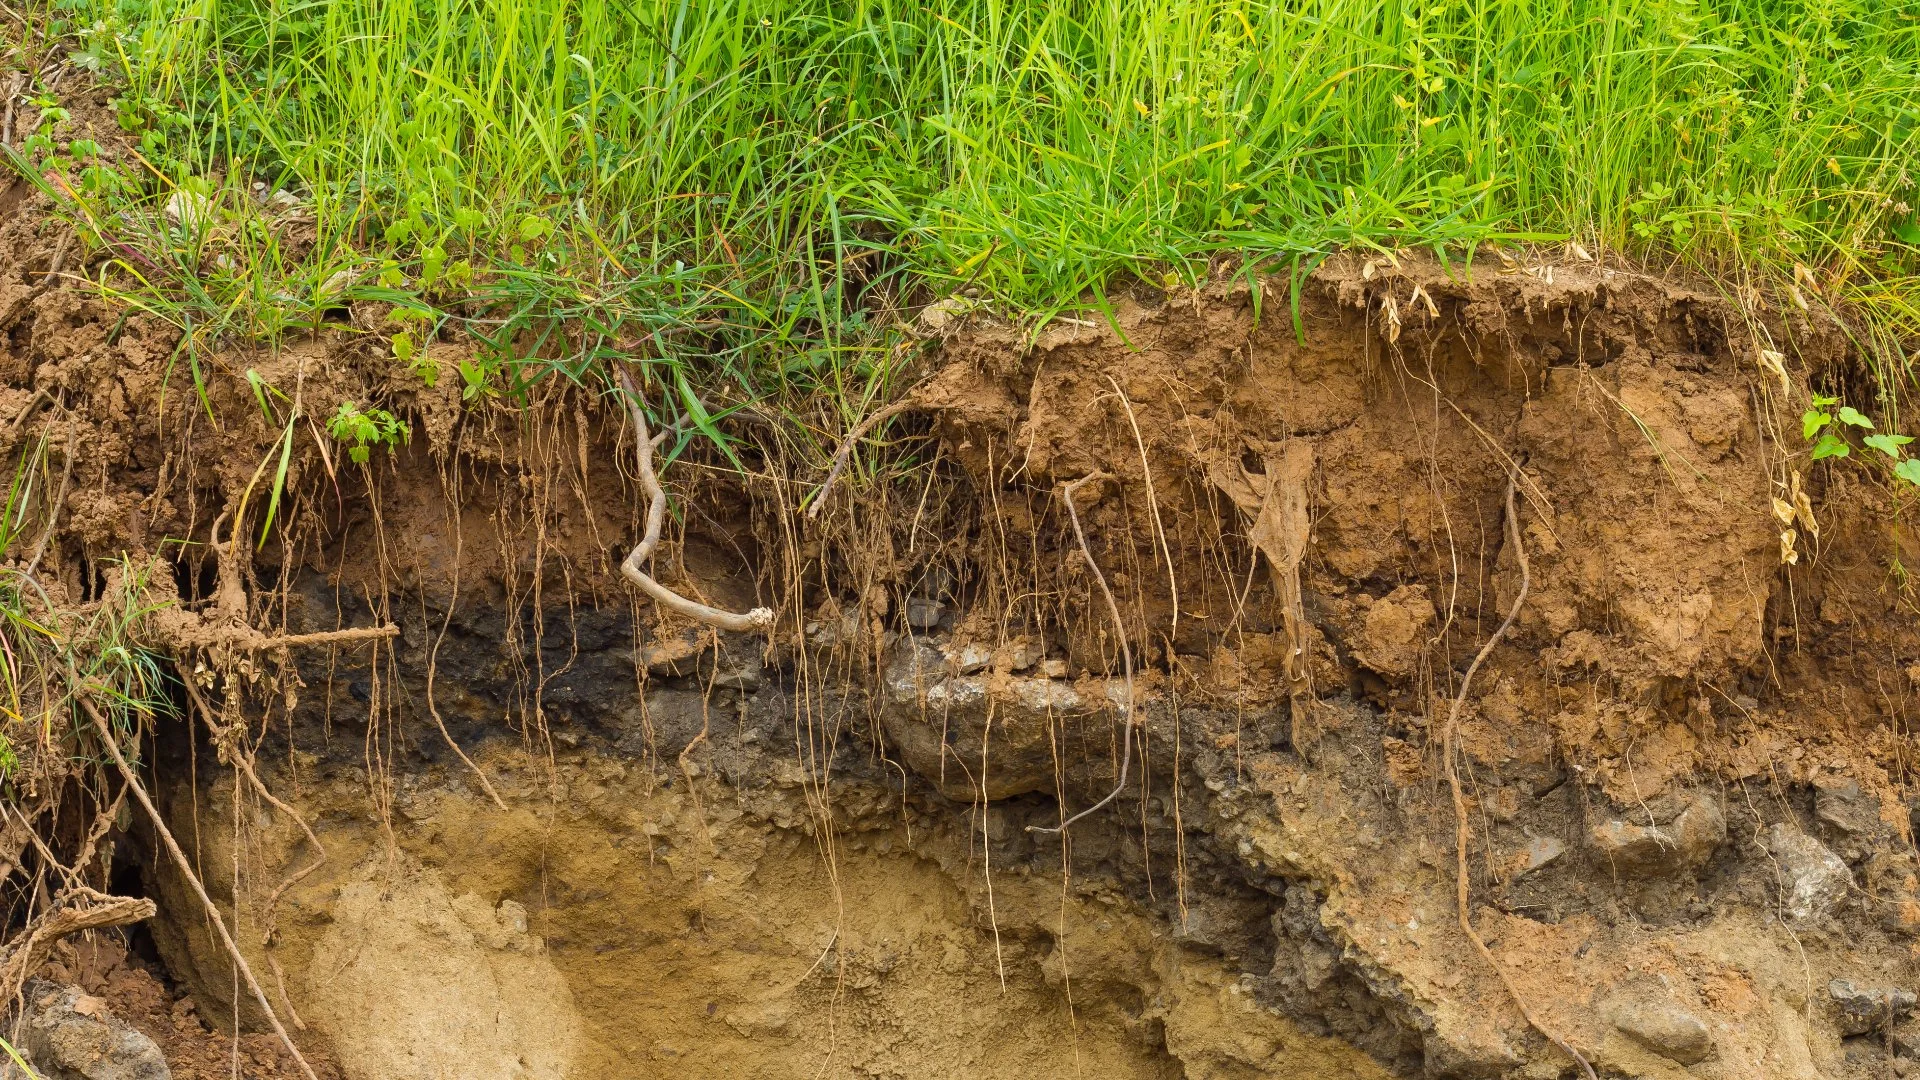 5 Soil Erosion Control Methods to Consider Using for Your Property